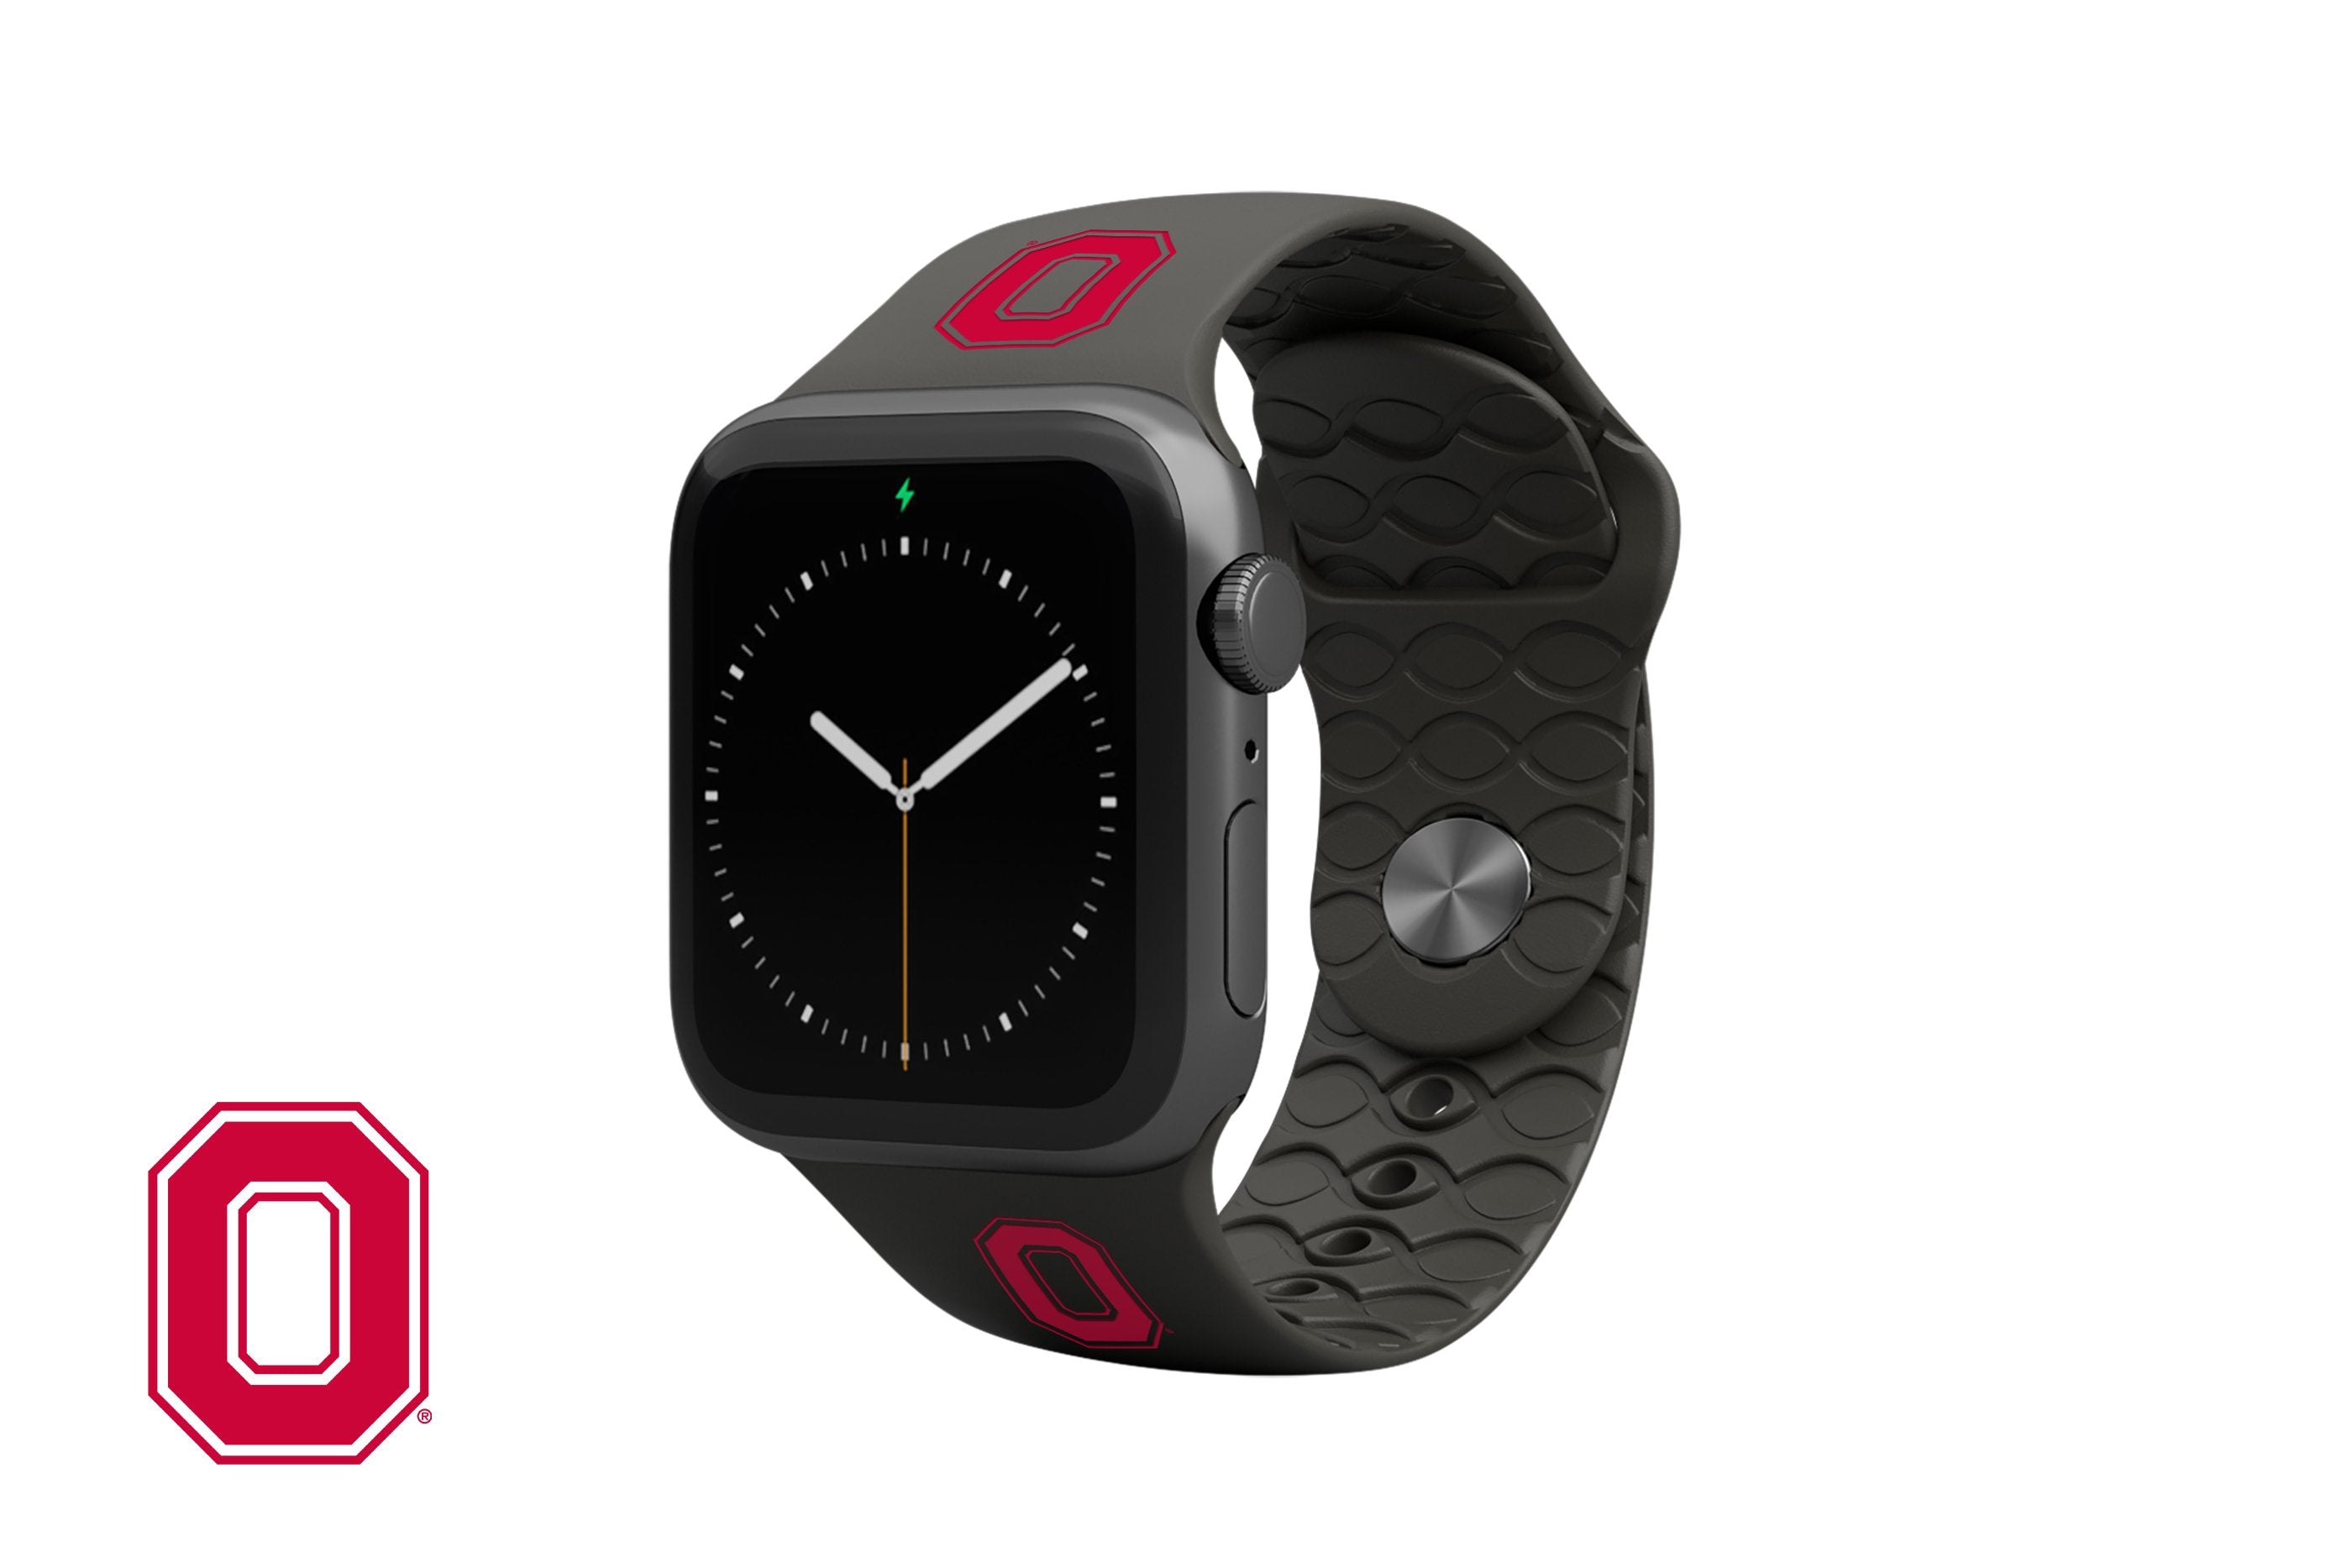 College Ohio State Black Apple Watch Band with gray hardware viewed top down